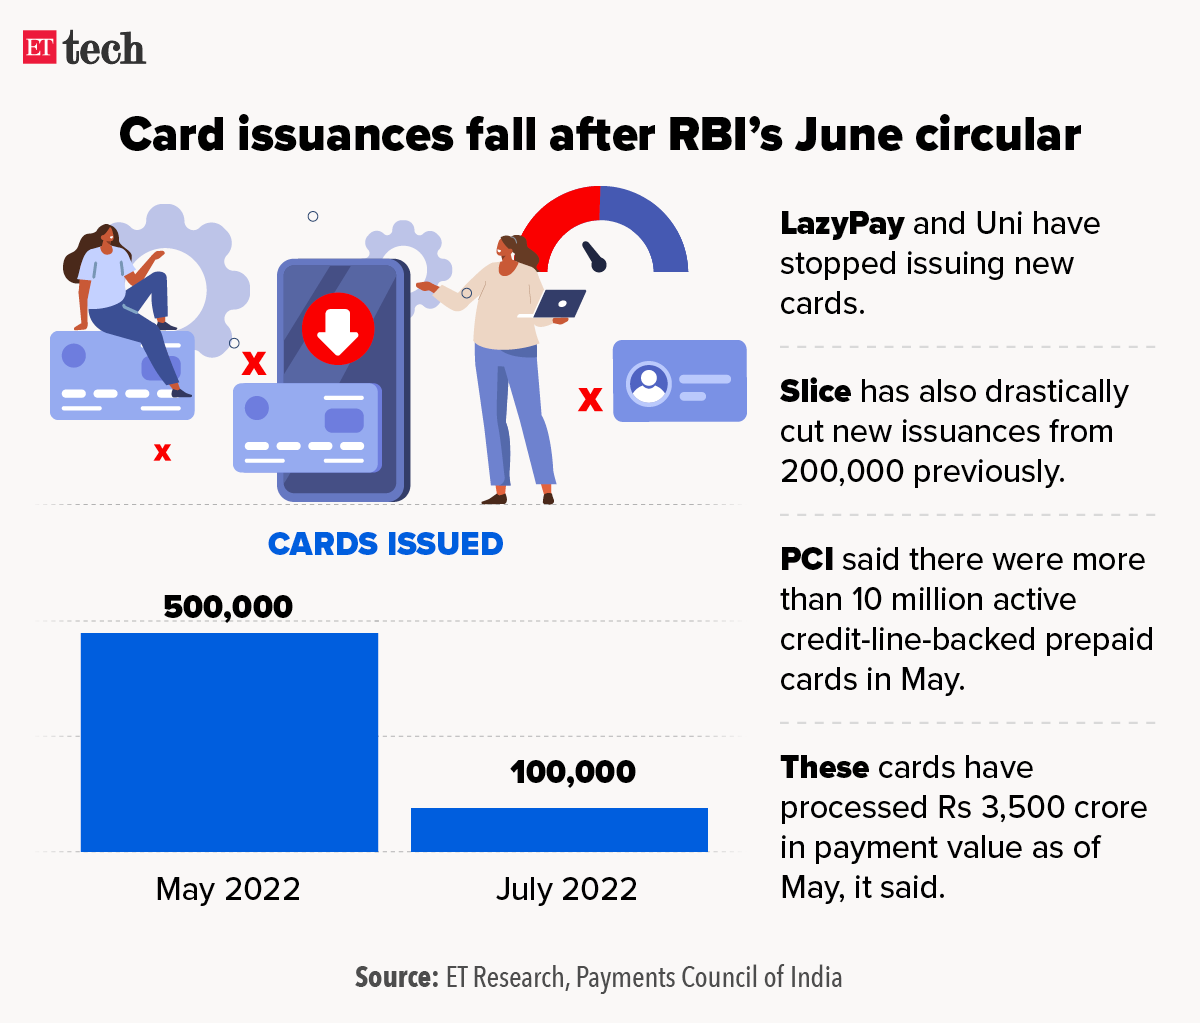 Card issuances fall after RBIs June circular